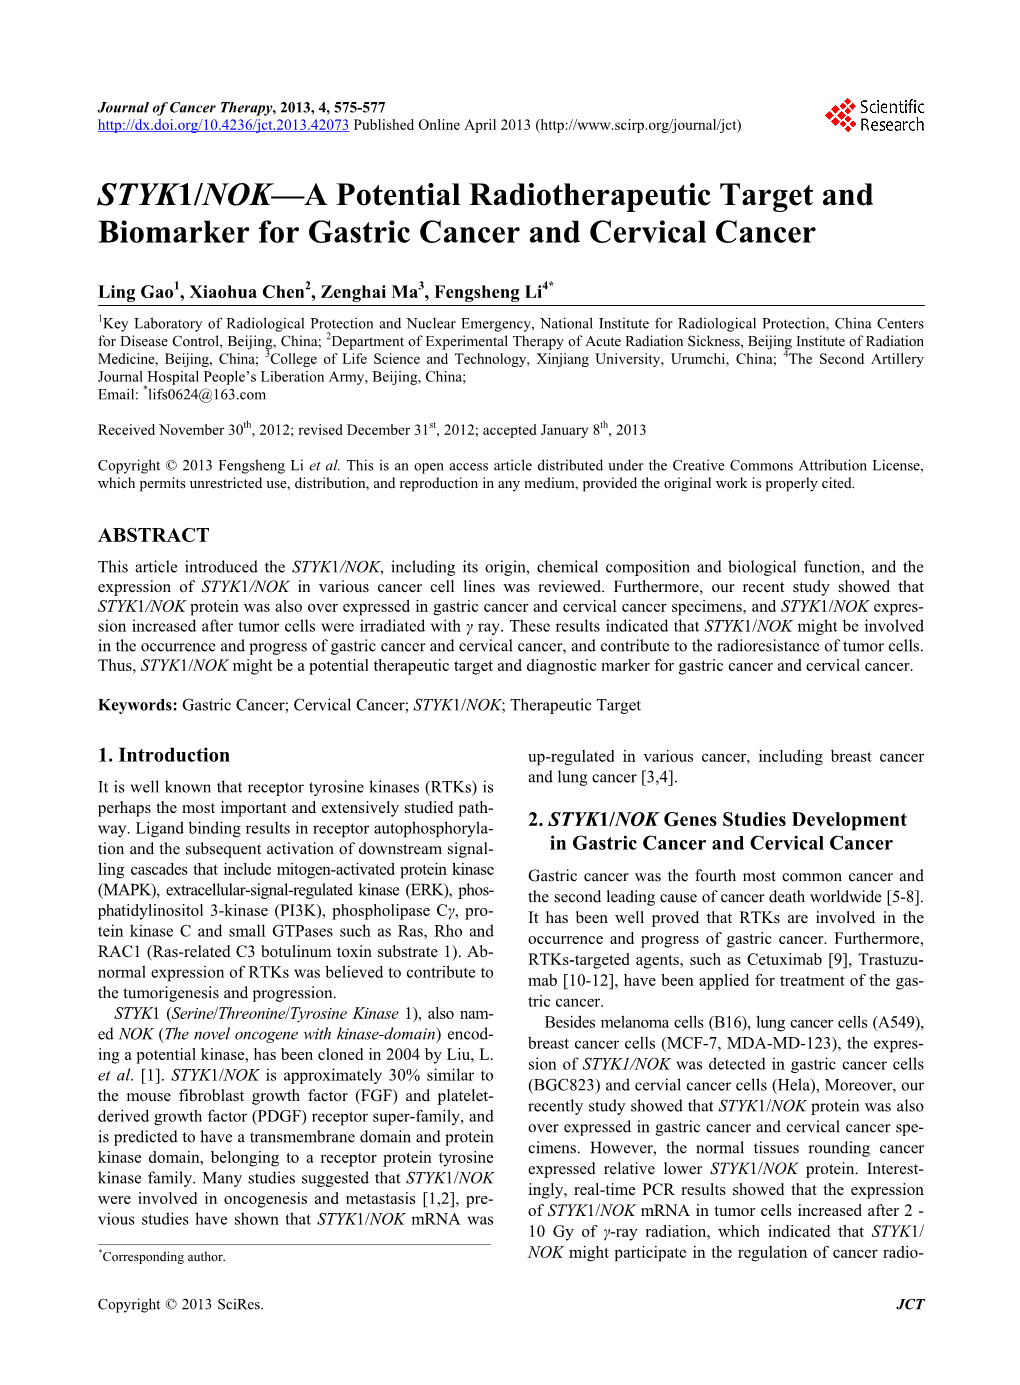 STYK1/NOK—A Potential Radiotherapeutic Target and Biomarker for Gastric Cancer and Cervical Cancer